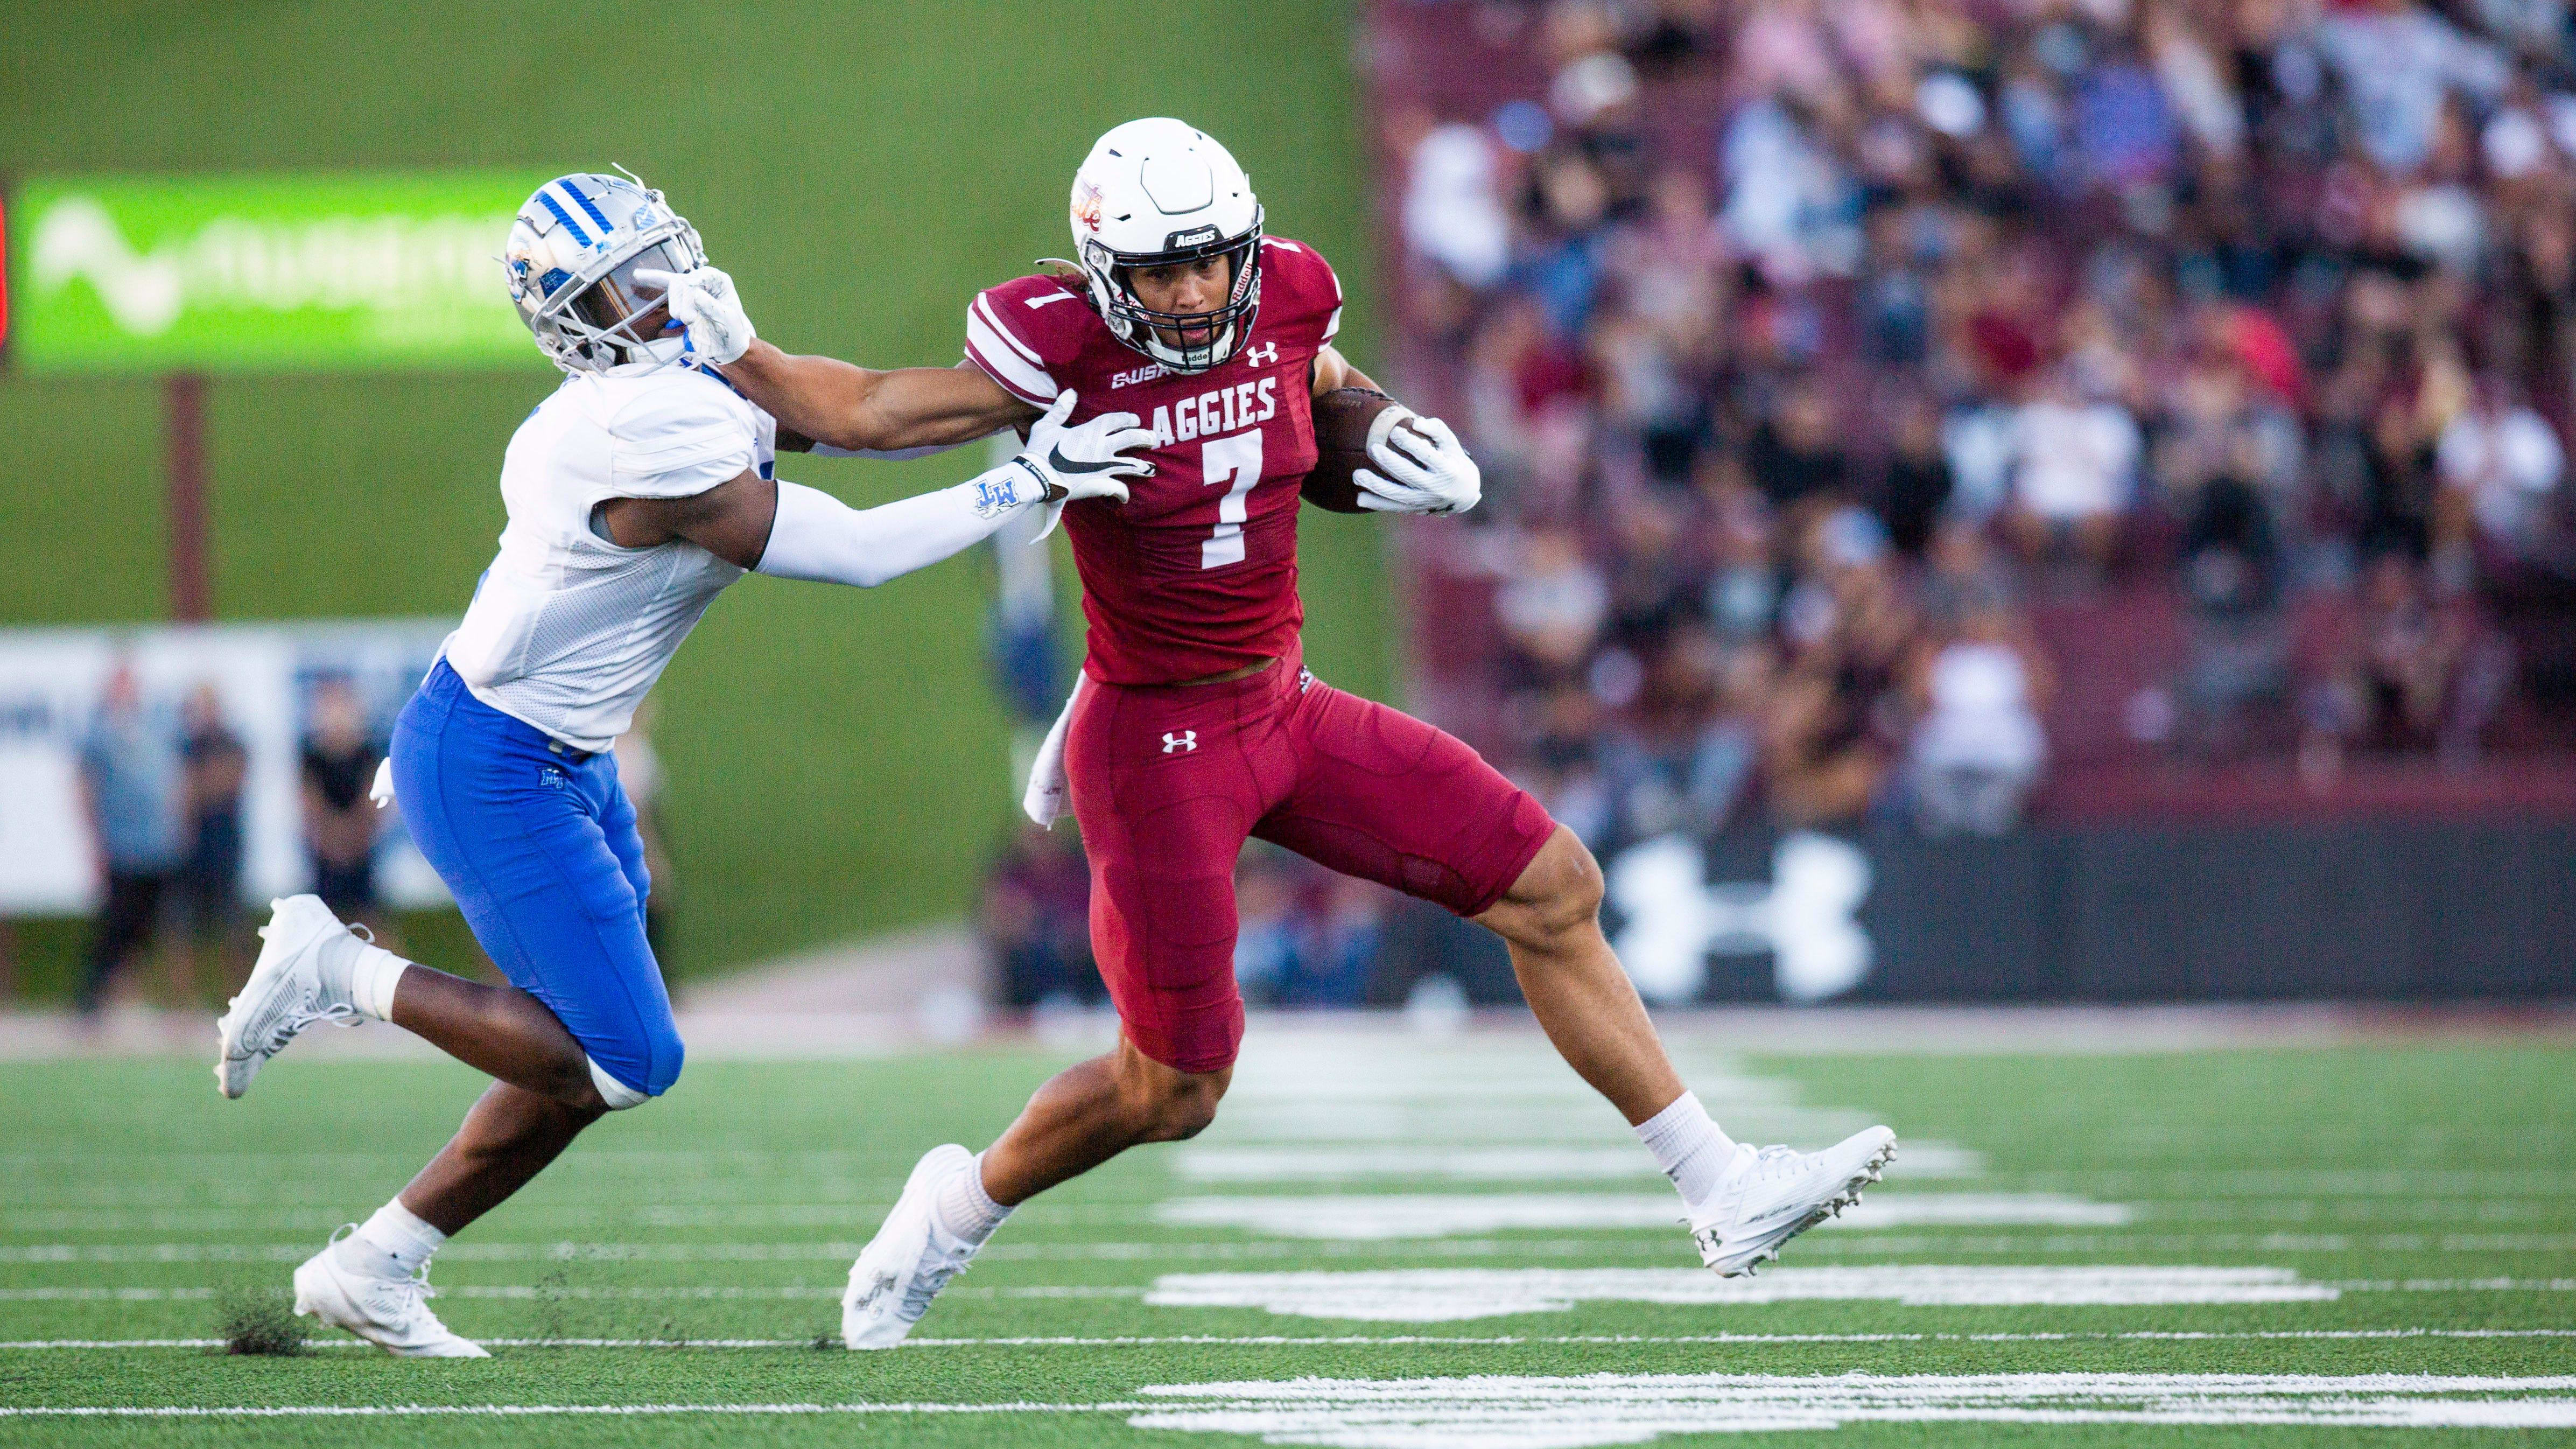 TRANSFER PORTAL: New Mexico State QB/TE Eli Stowers Intends To Transfer